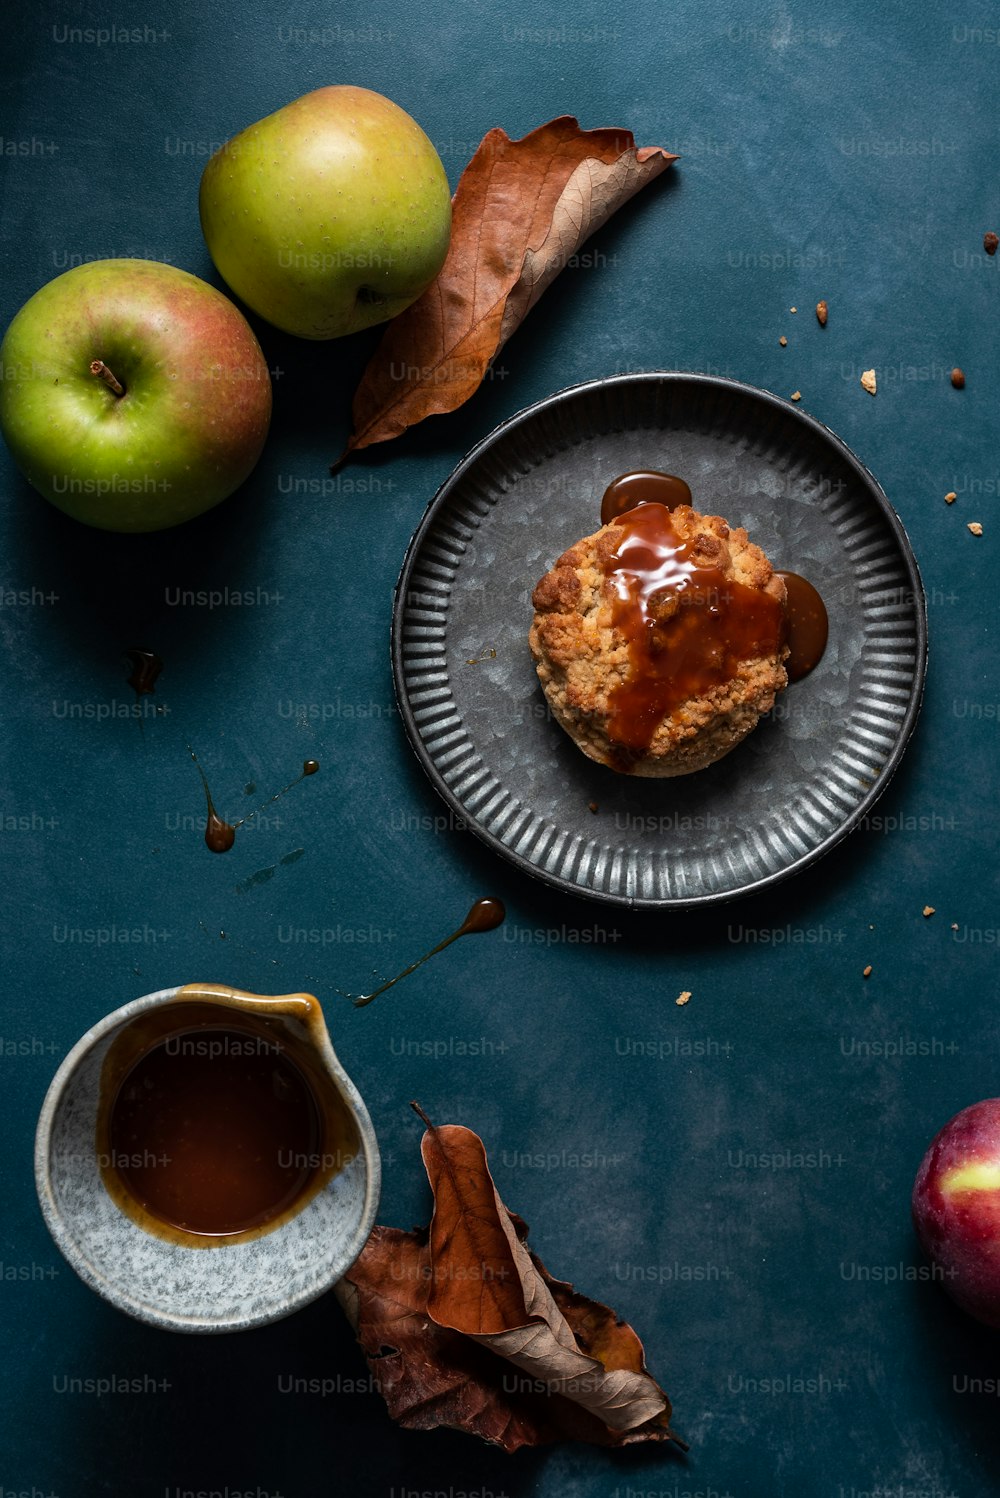 a muffin on a plate next to two apples and a cup of coffee